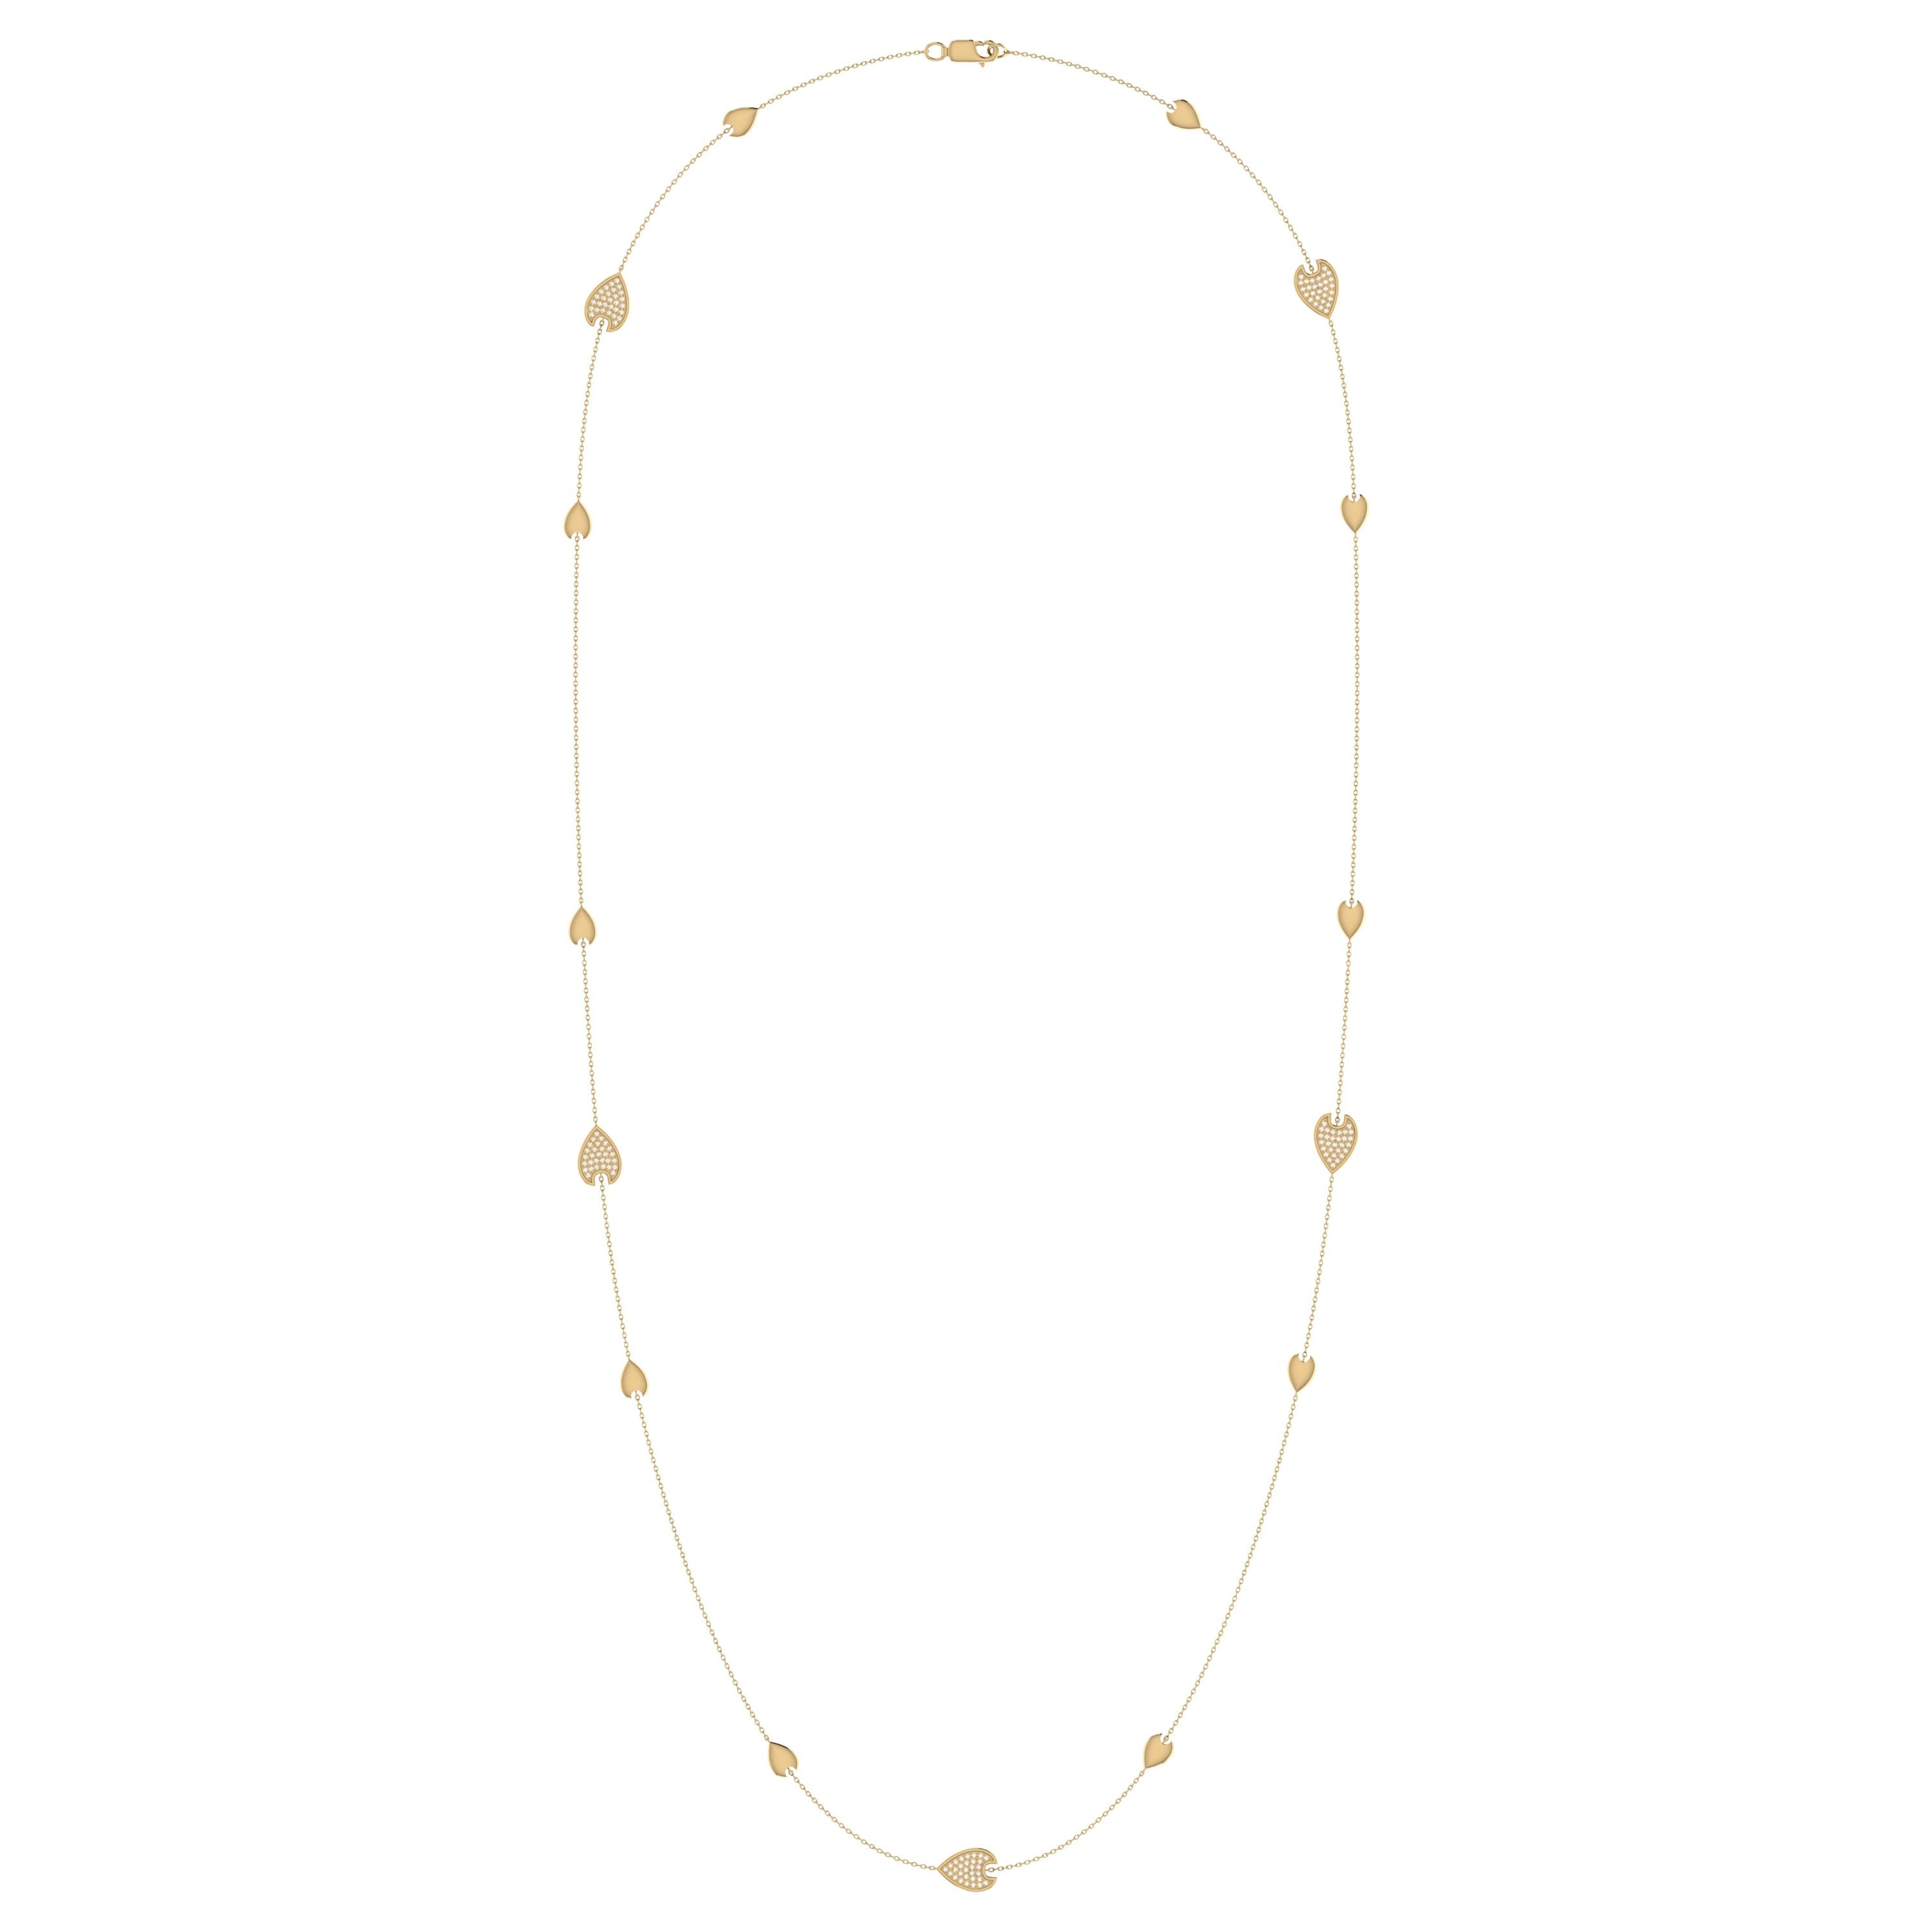 Raindrop Diamond Necklace in 14K Yellow Gold Vermeil - 0.26 Carats, 30" Cable Chain - Jewelry & Watches - Bijou Her -  -  - 